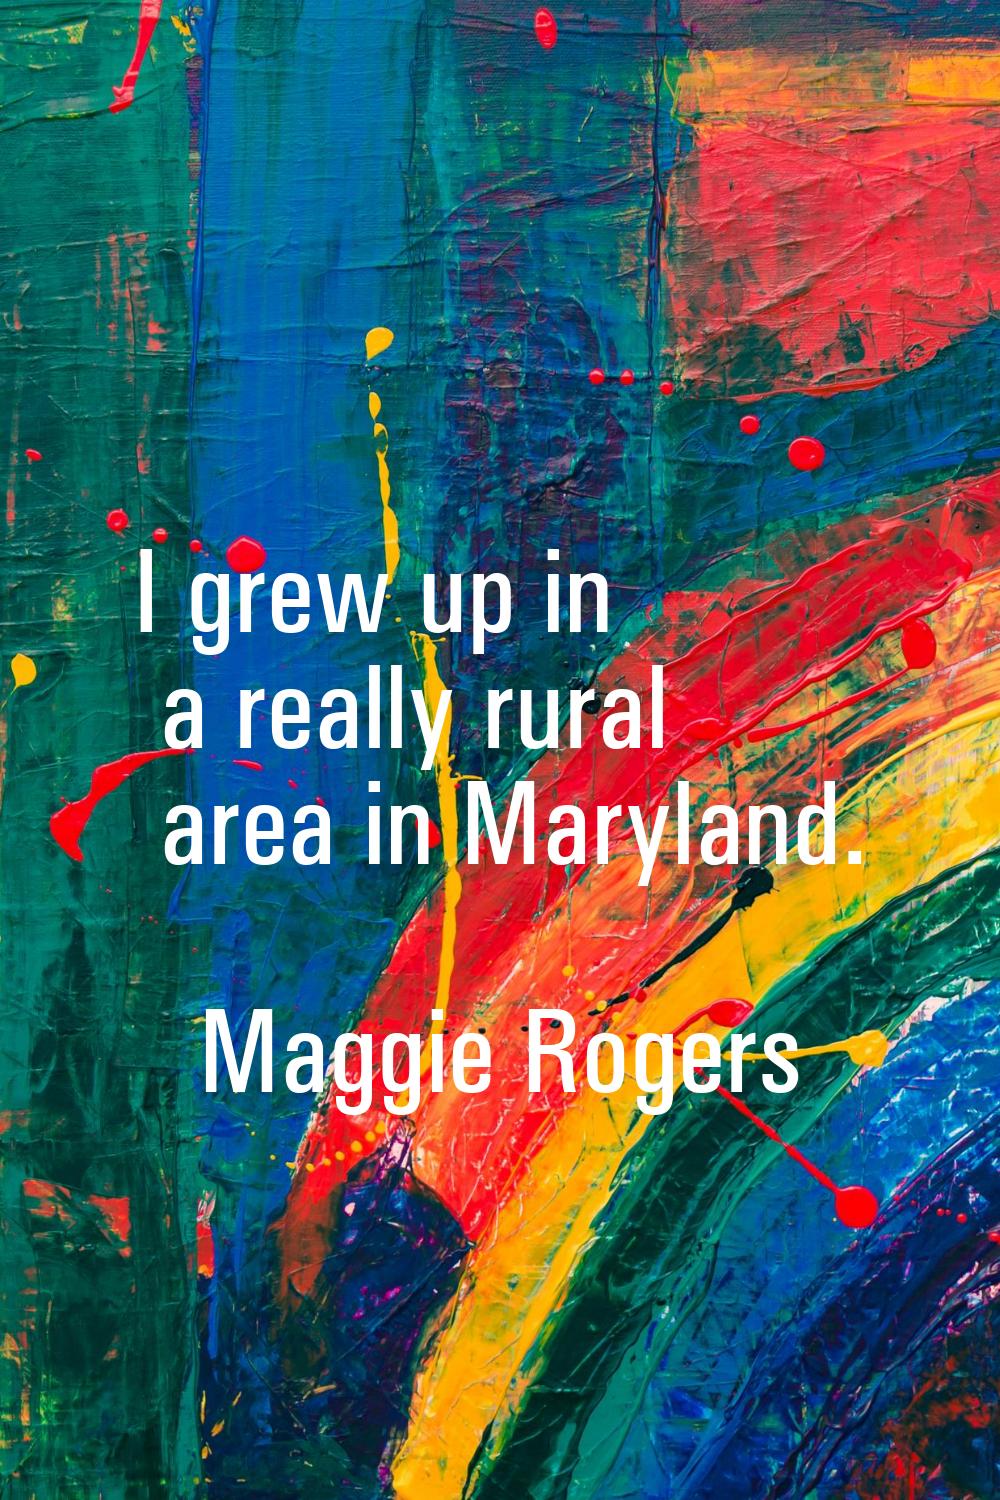 I grew up in a really rural area in Maryland.